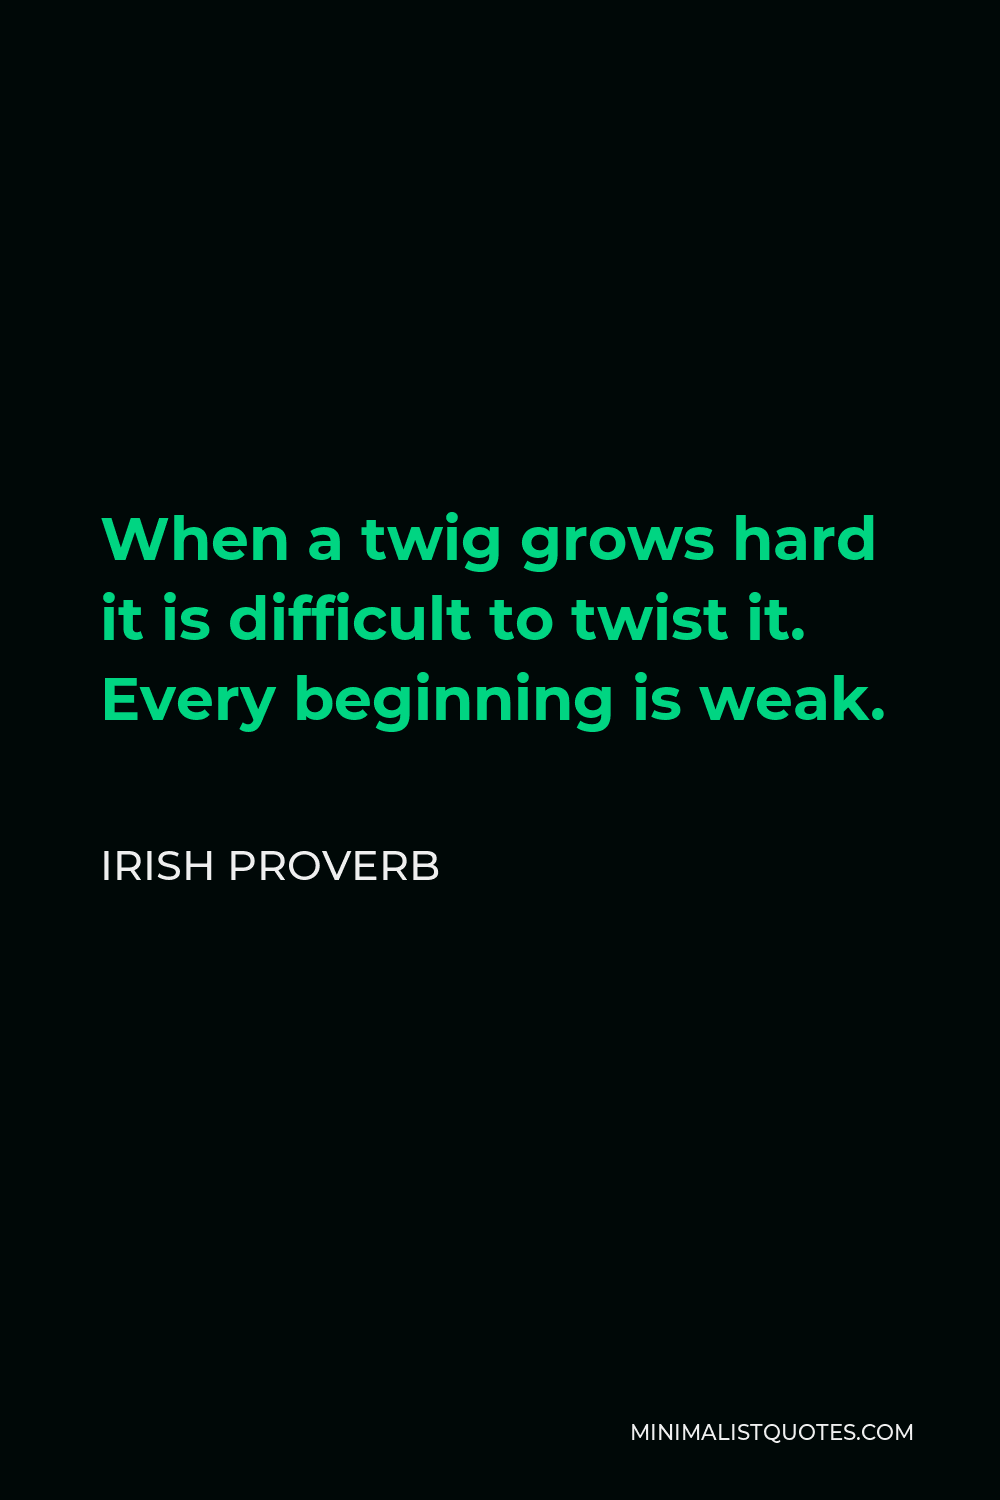 Irish Proverb Quote - When a twig grows hard it is difficult to twist it. Every beginning is weak.